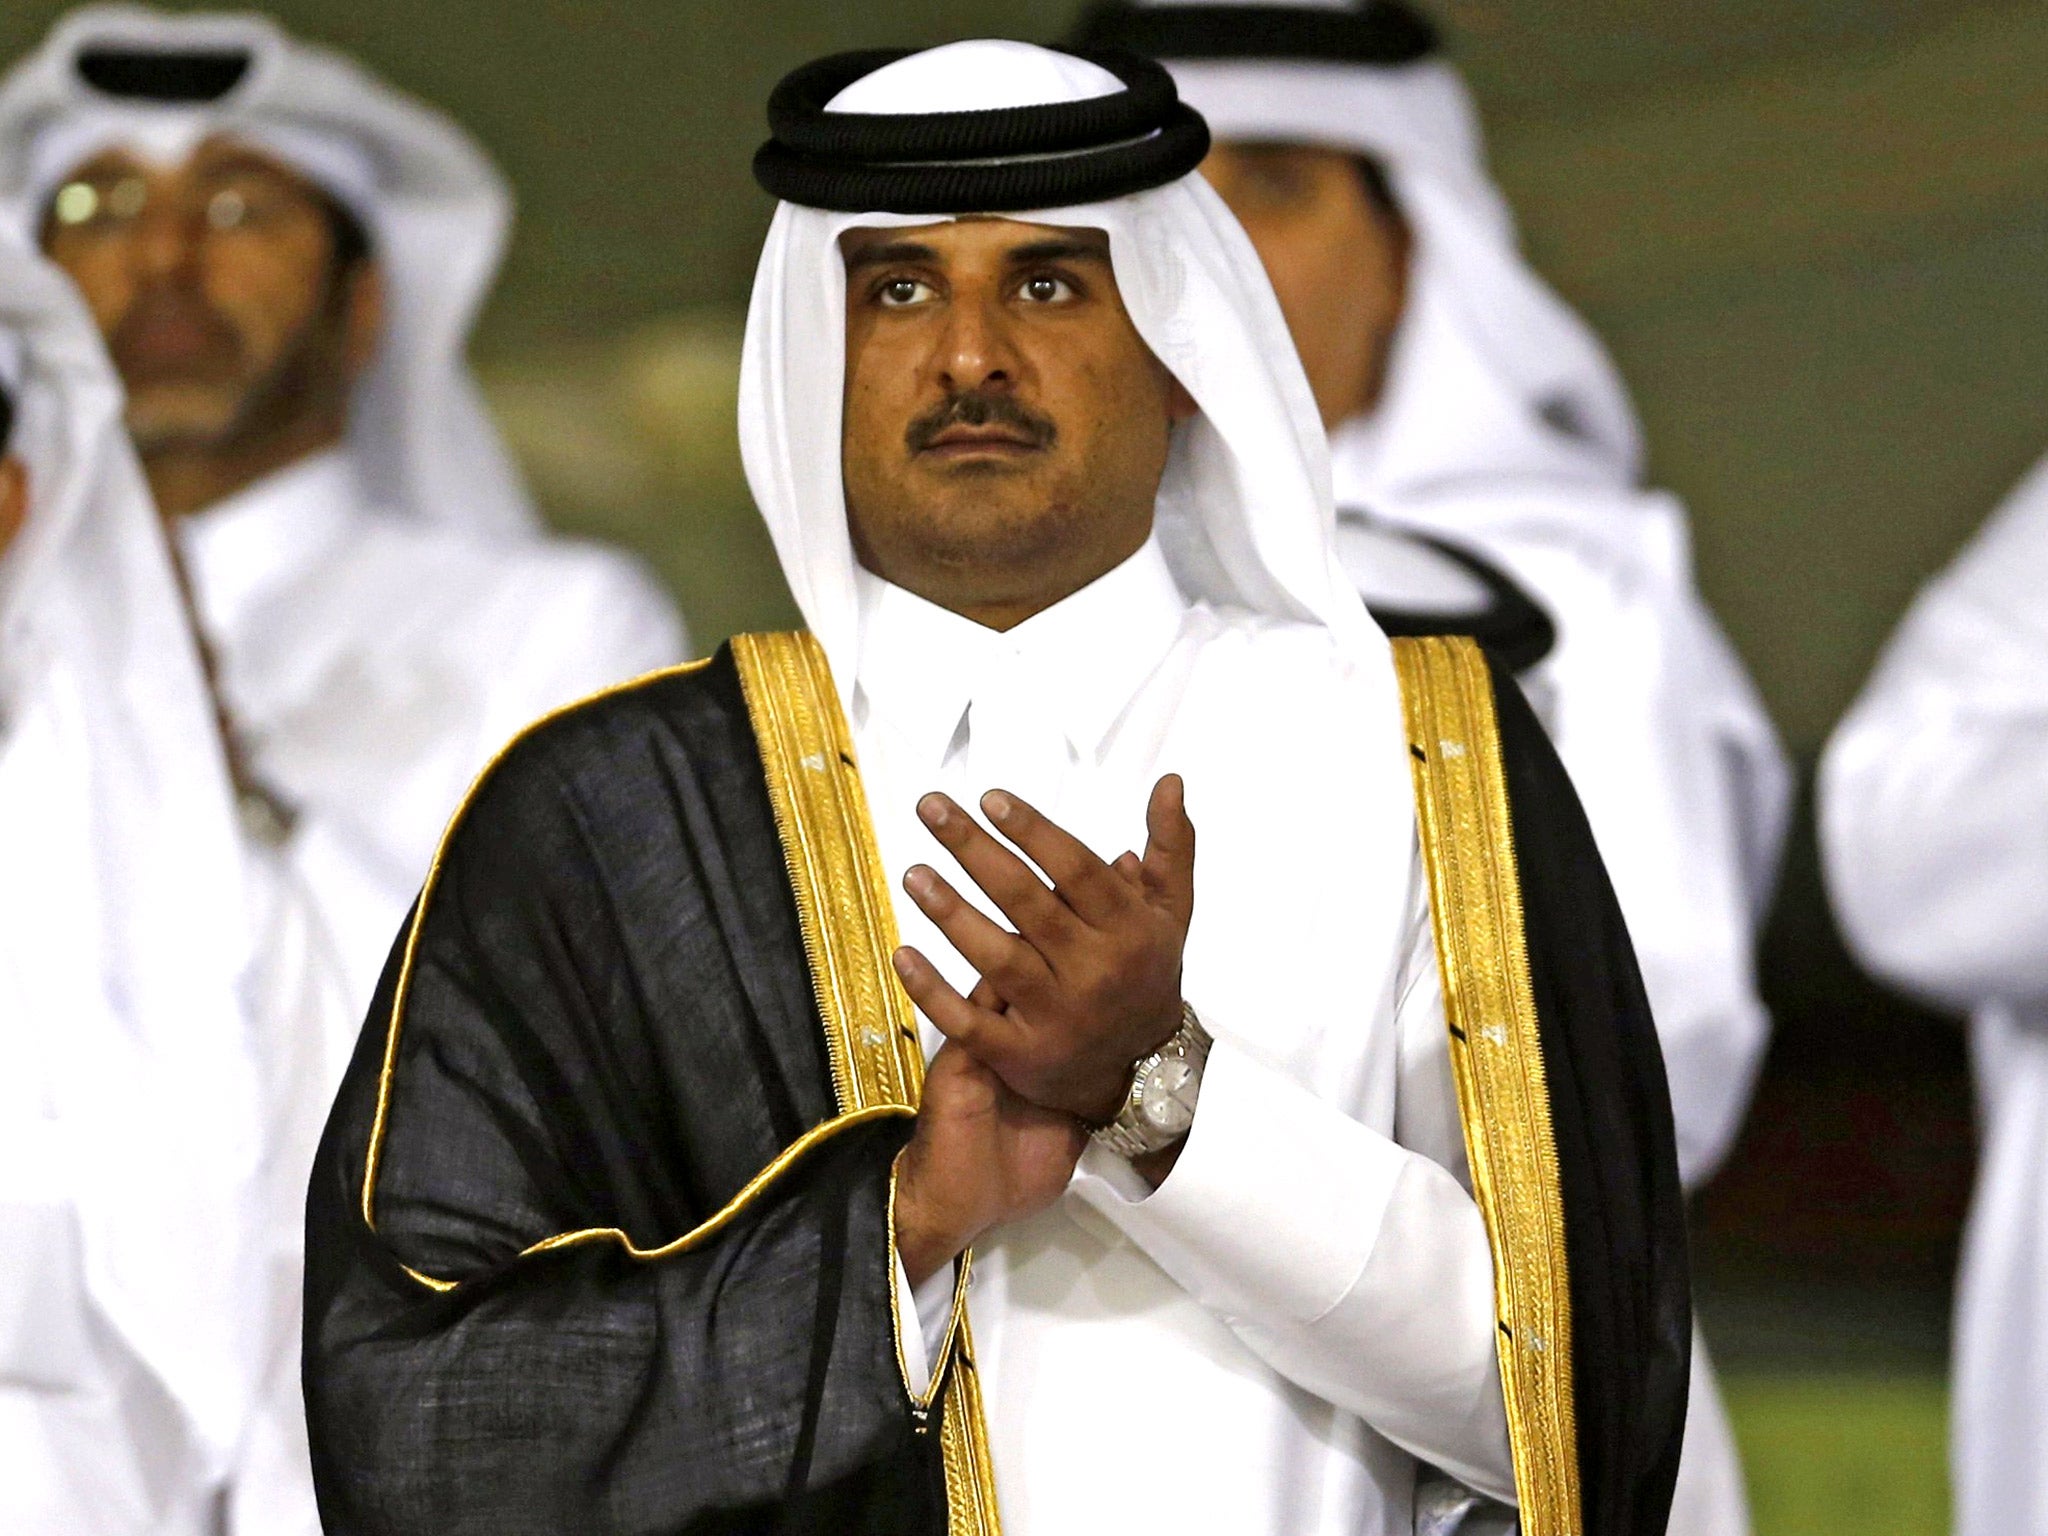 Sheikh Tamim (pictured) served by his father’s side for several years before his 2013 abdication